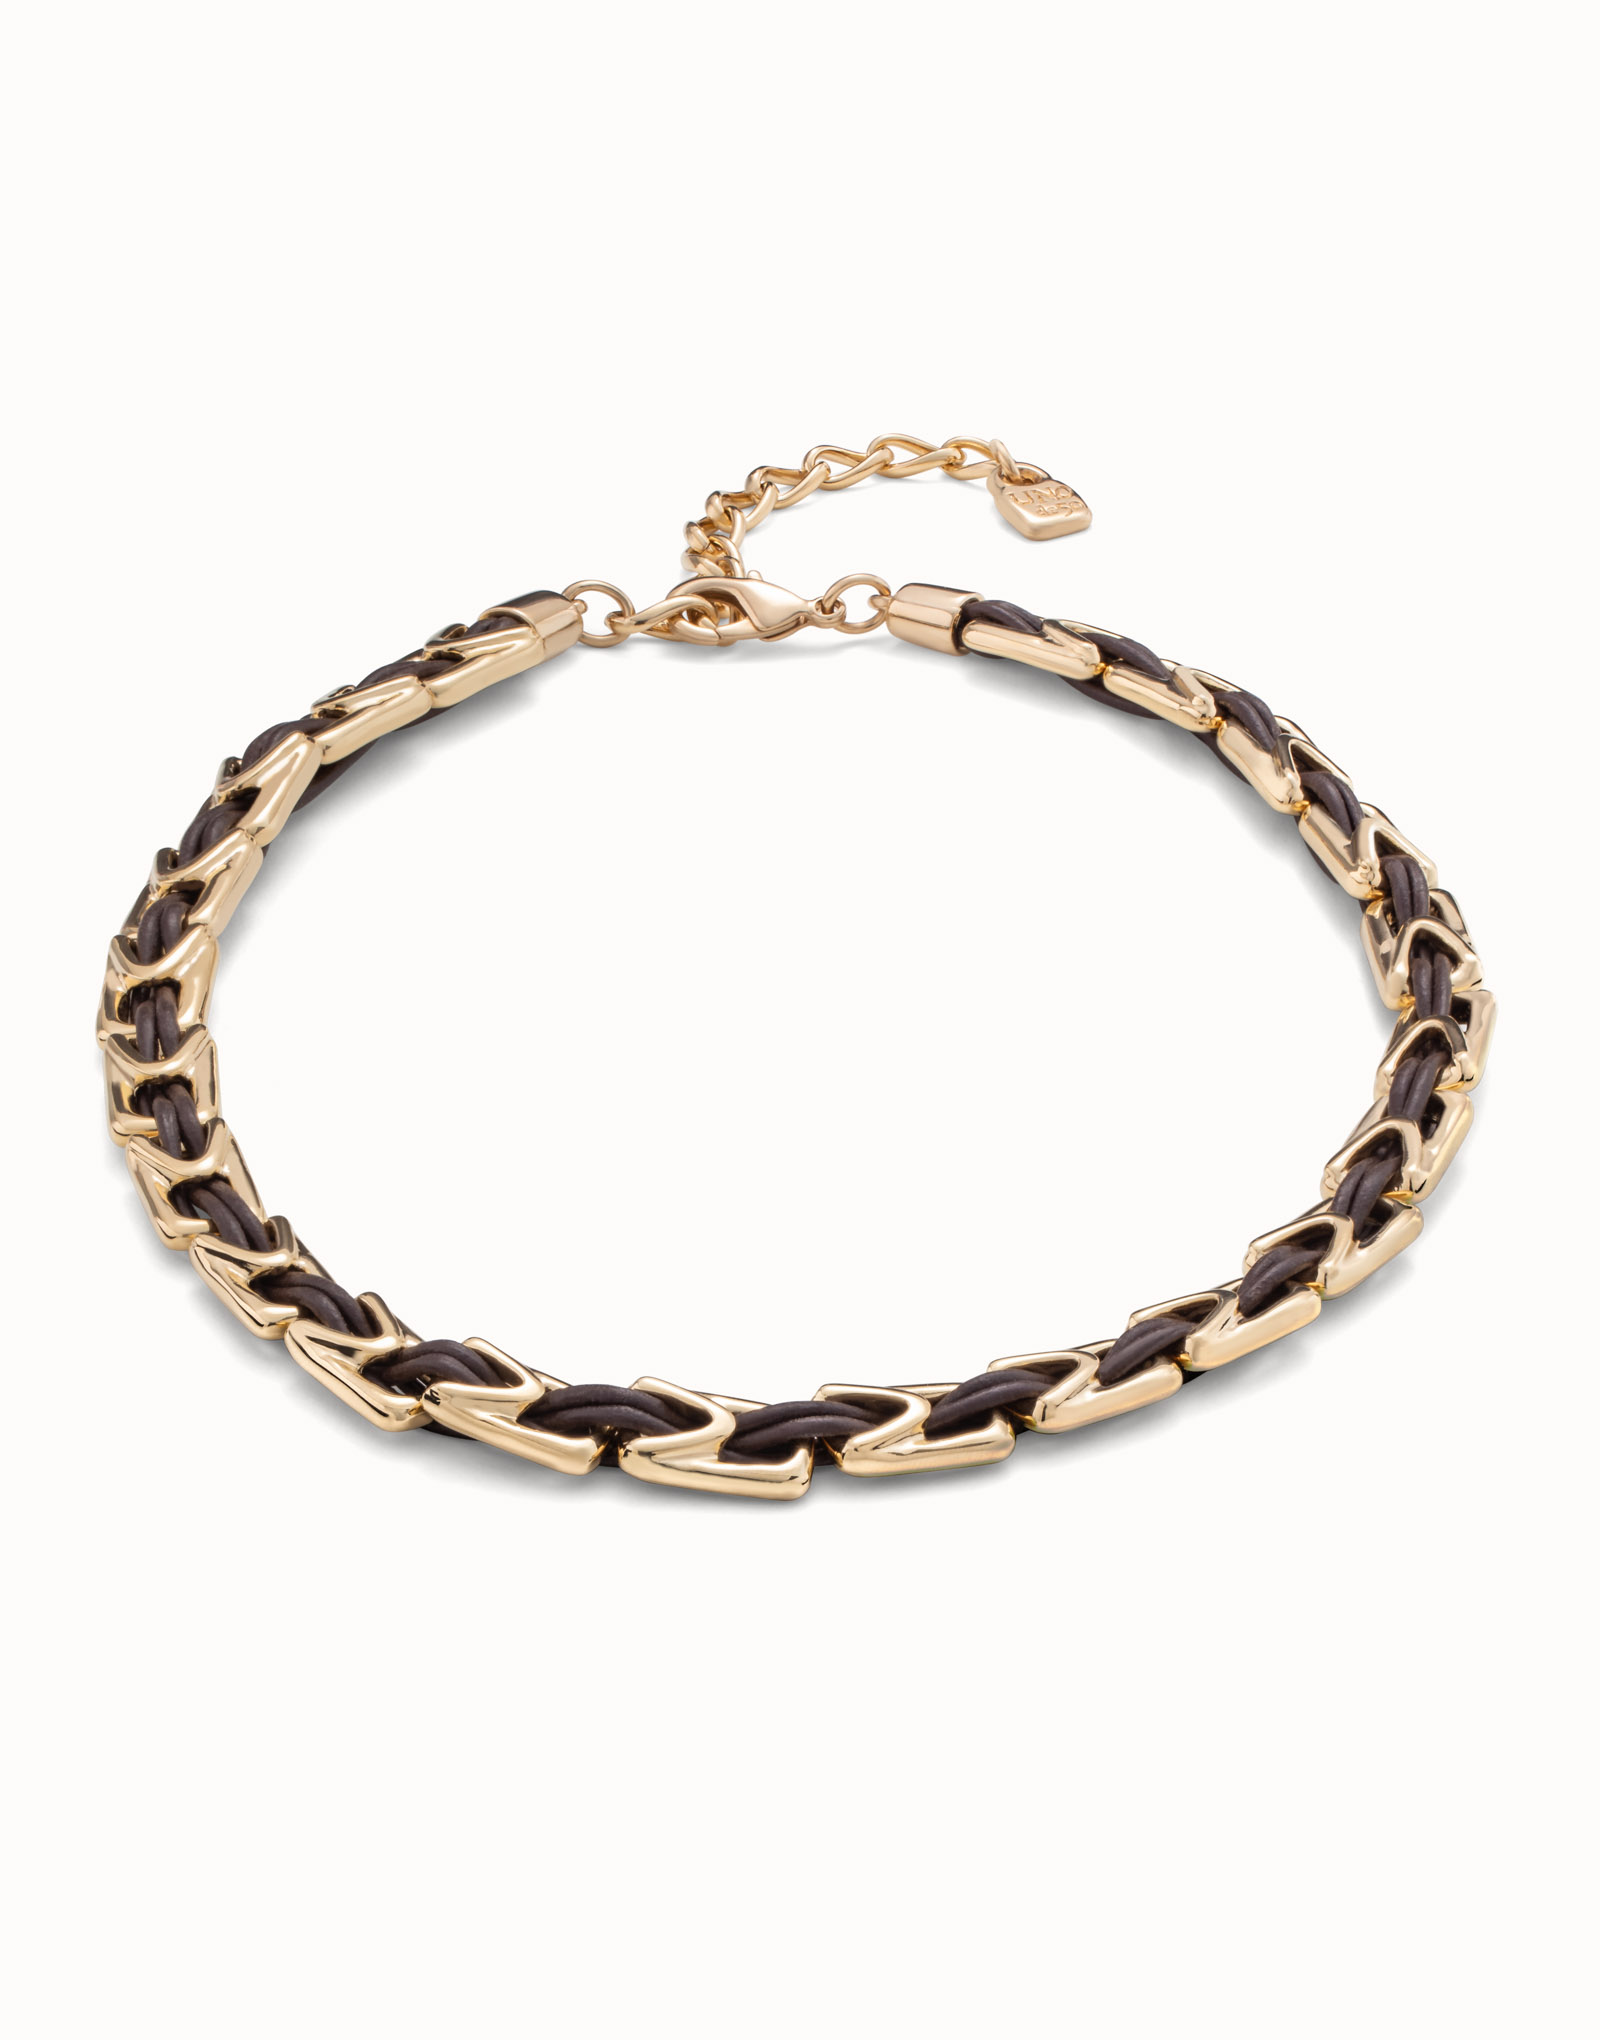 Short leather necklace with 18K gold-plated links., Golden, large image number null